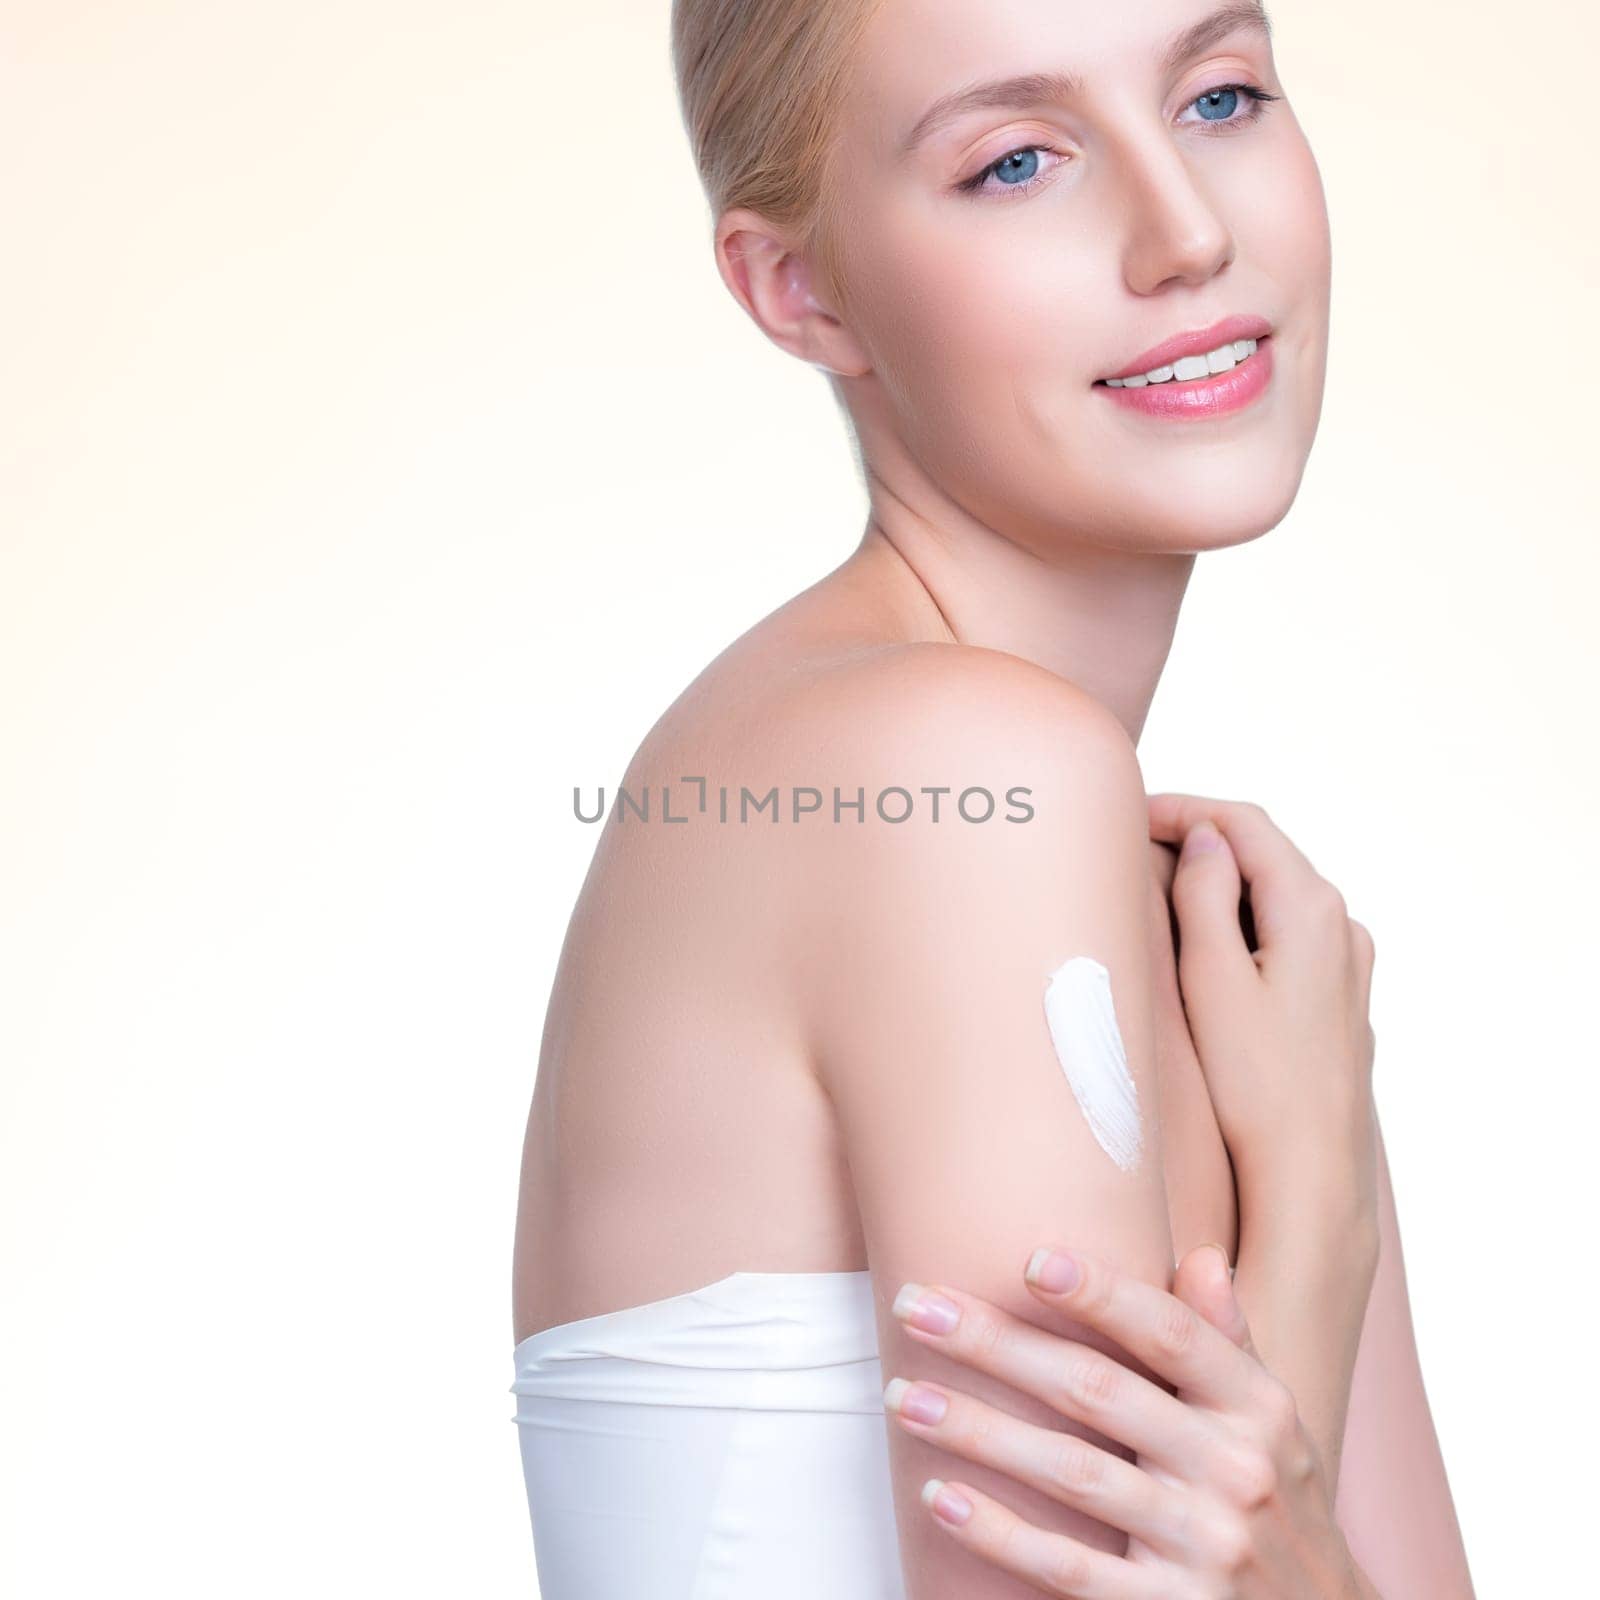 Closeup personable beautiful woman putting skincare moisturizer cream on her arm looking in camera in isolated background as concept for beauty care treatment. Female model applying lotion on her body